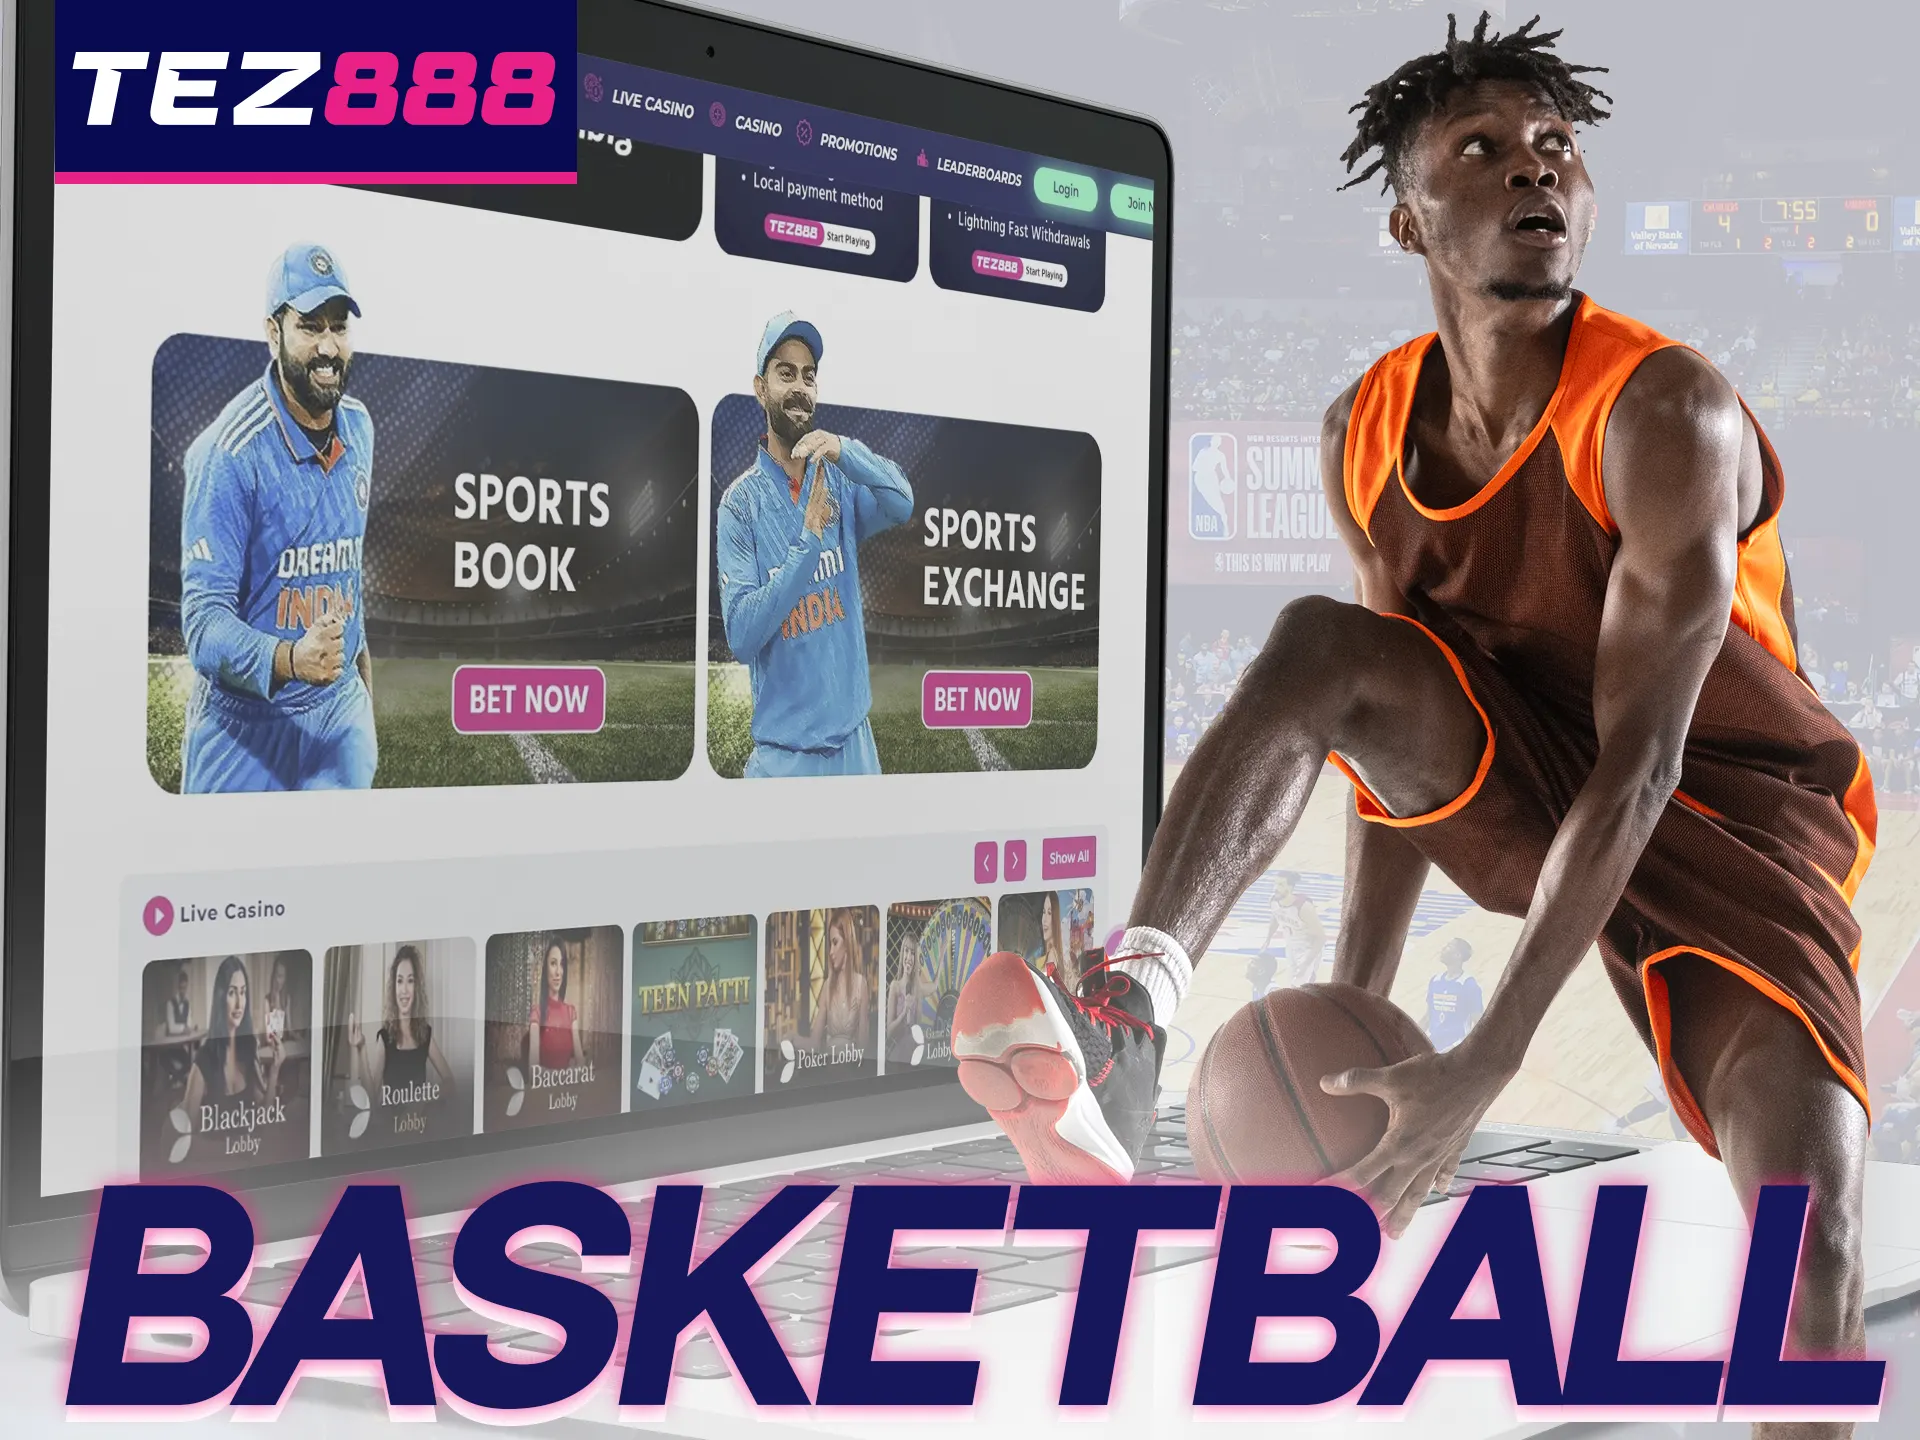 On the official Tez888 website you can bet on popular basketball games .